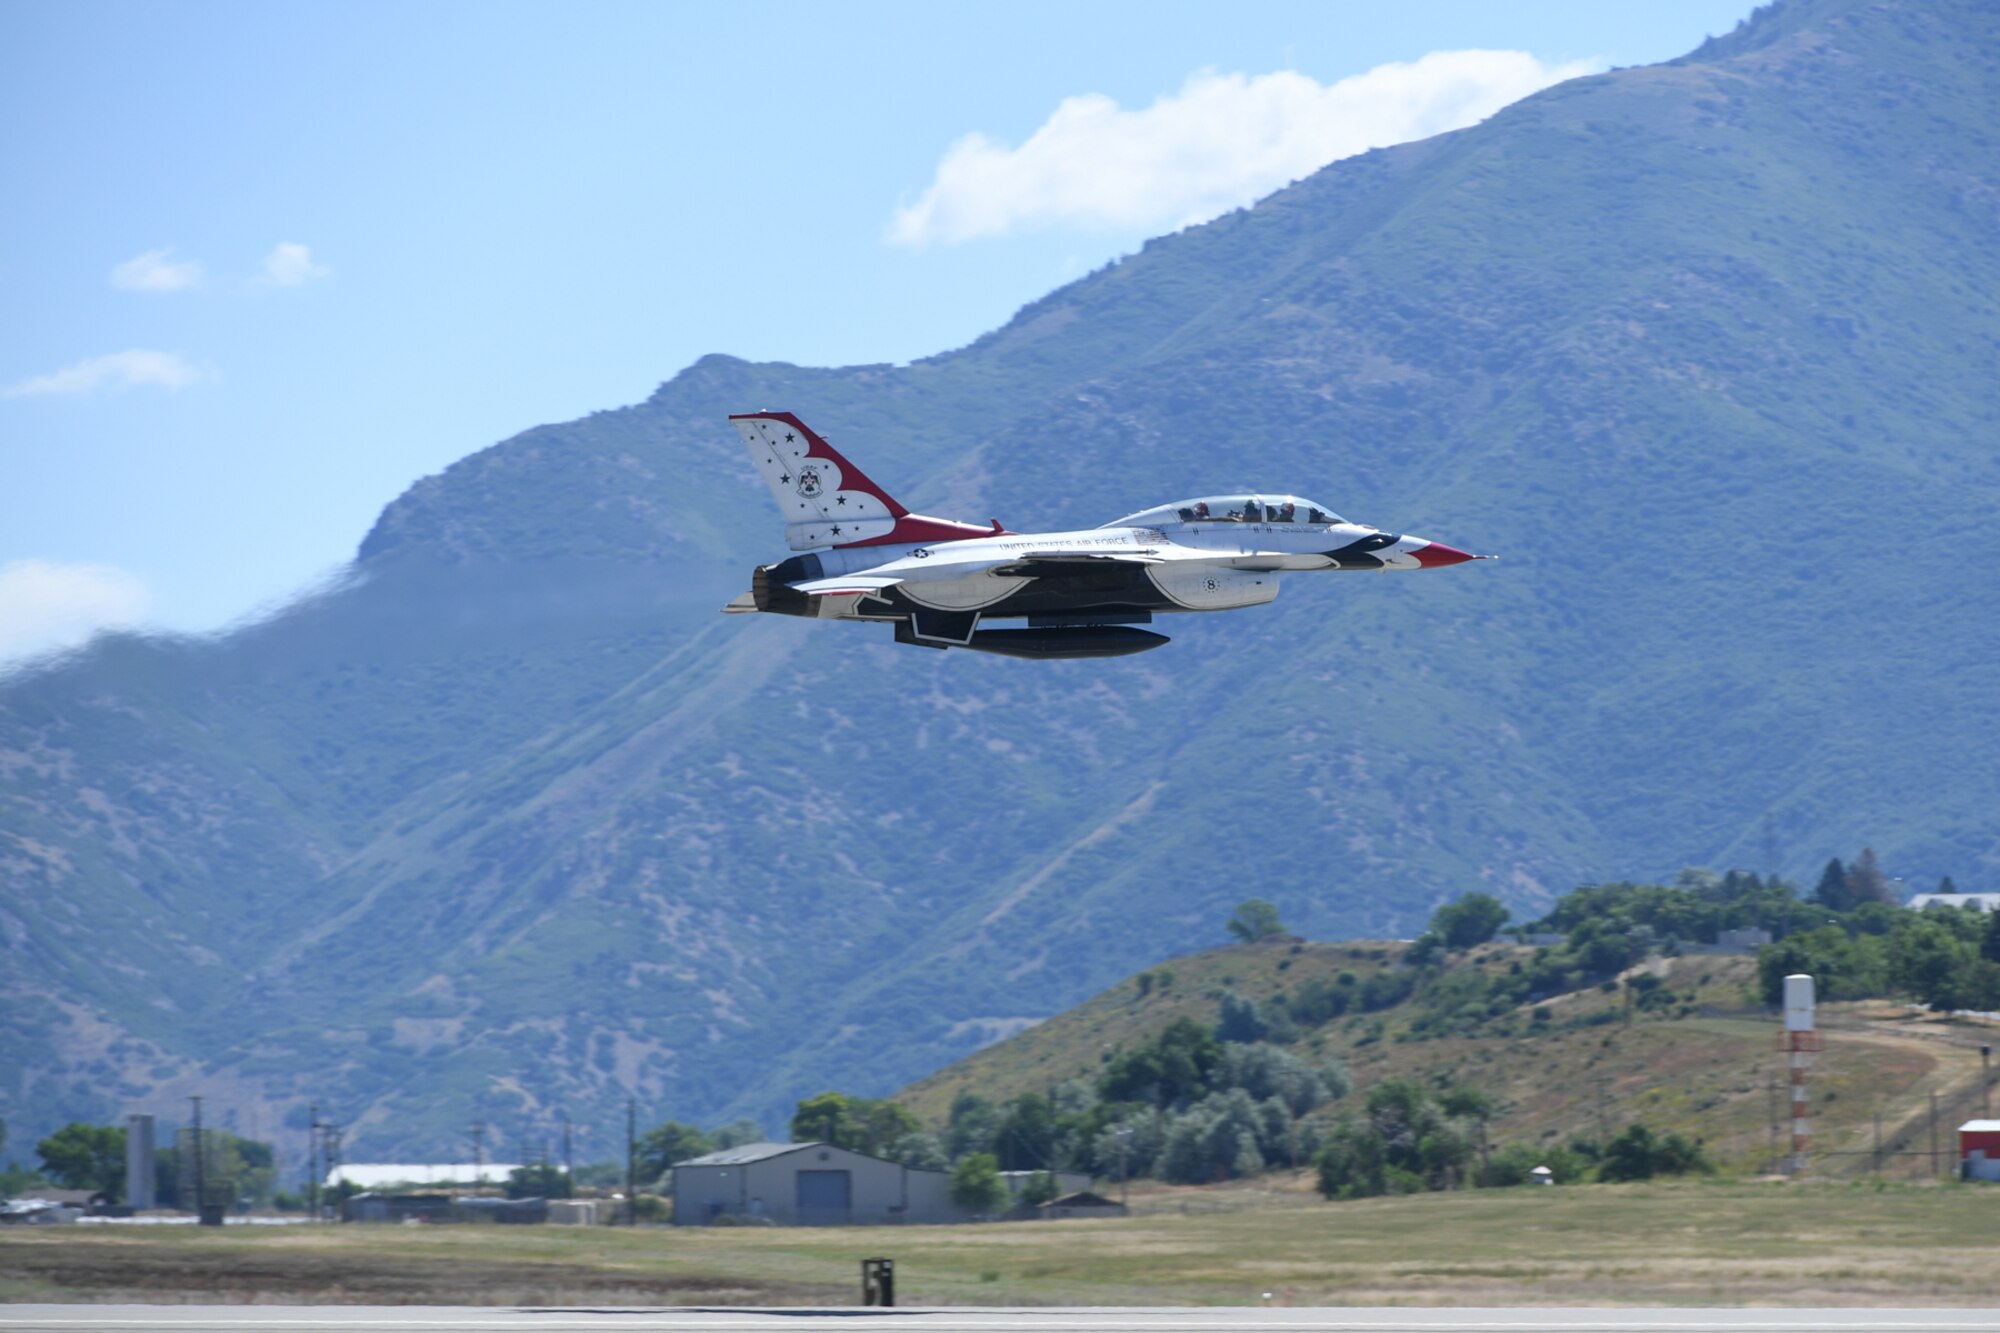 Sergeant Aaron Thompson, Utah Washington County Sheriff, takes off with Maj. Randen Felker, U.S. Air Force Thunderbirds pilot, June 22, 2018, at Hill Air Force Base, Utah. Thompson was selected to fly with the Thunderbirds as part of their Hometown Hero program. (U.S. Air Force photo by Cynthia Griggs)